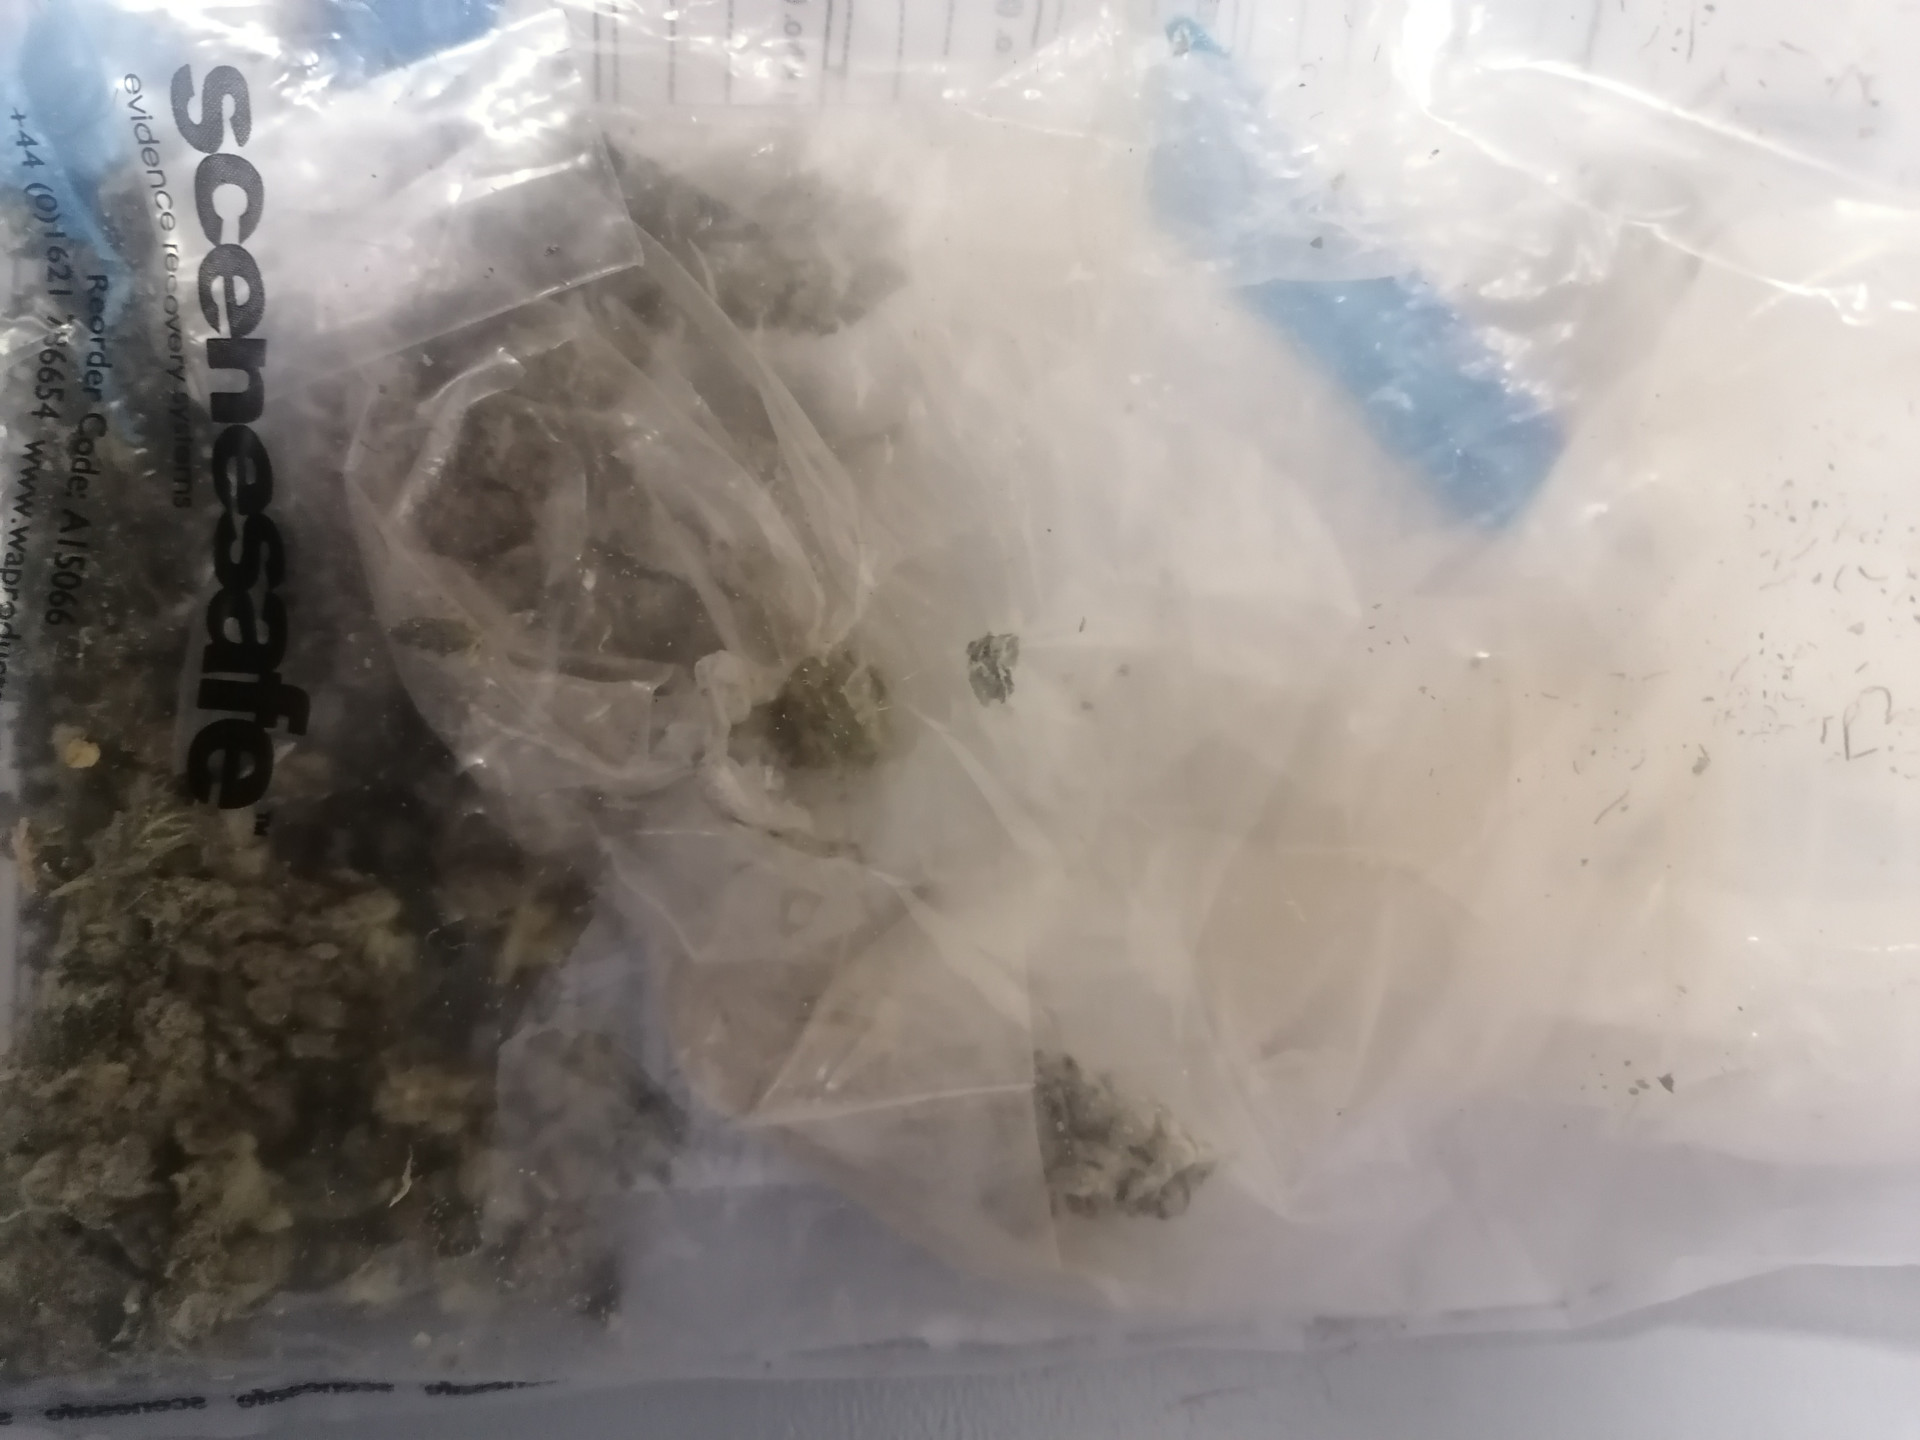 Police seize suspected class B drugs in Strabane